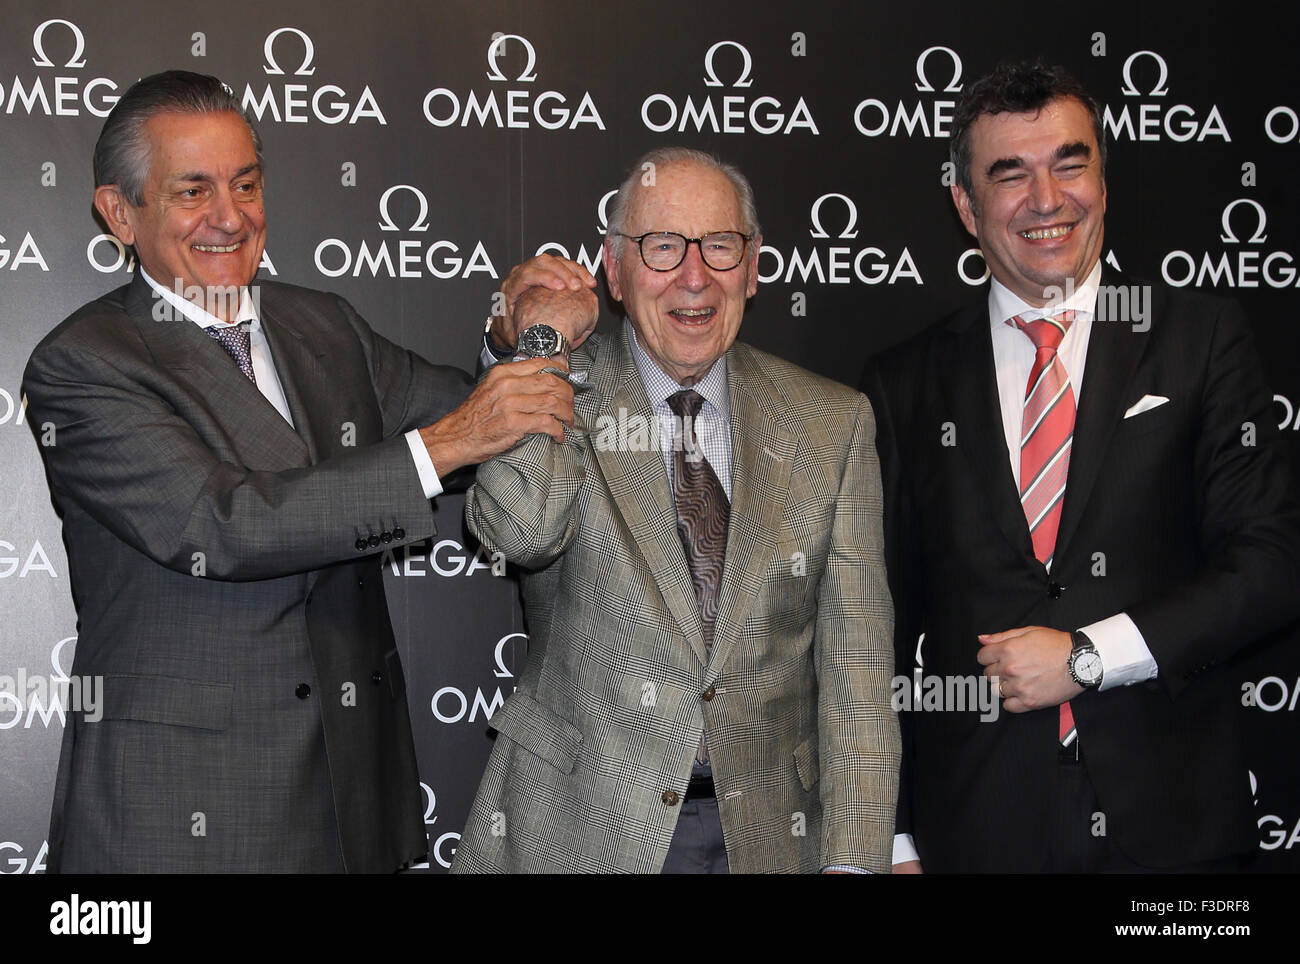 (L-R) President of OMEGA Stephen Urquhart, Apollo 13 astronaut James Lovell, The Swatch Group KKJapan president Christophe Savioz attend a press conference of OMEGA speedmaster at Tokyo Japan on 5 Oct 2015. © Motoo Naka/AFLO/Alamy Live News Stock Photo